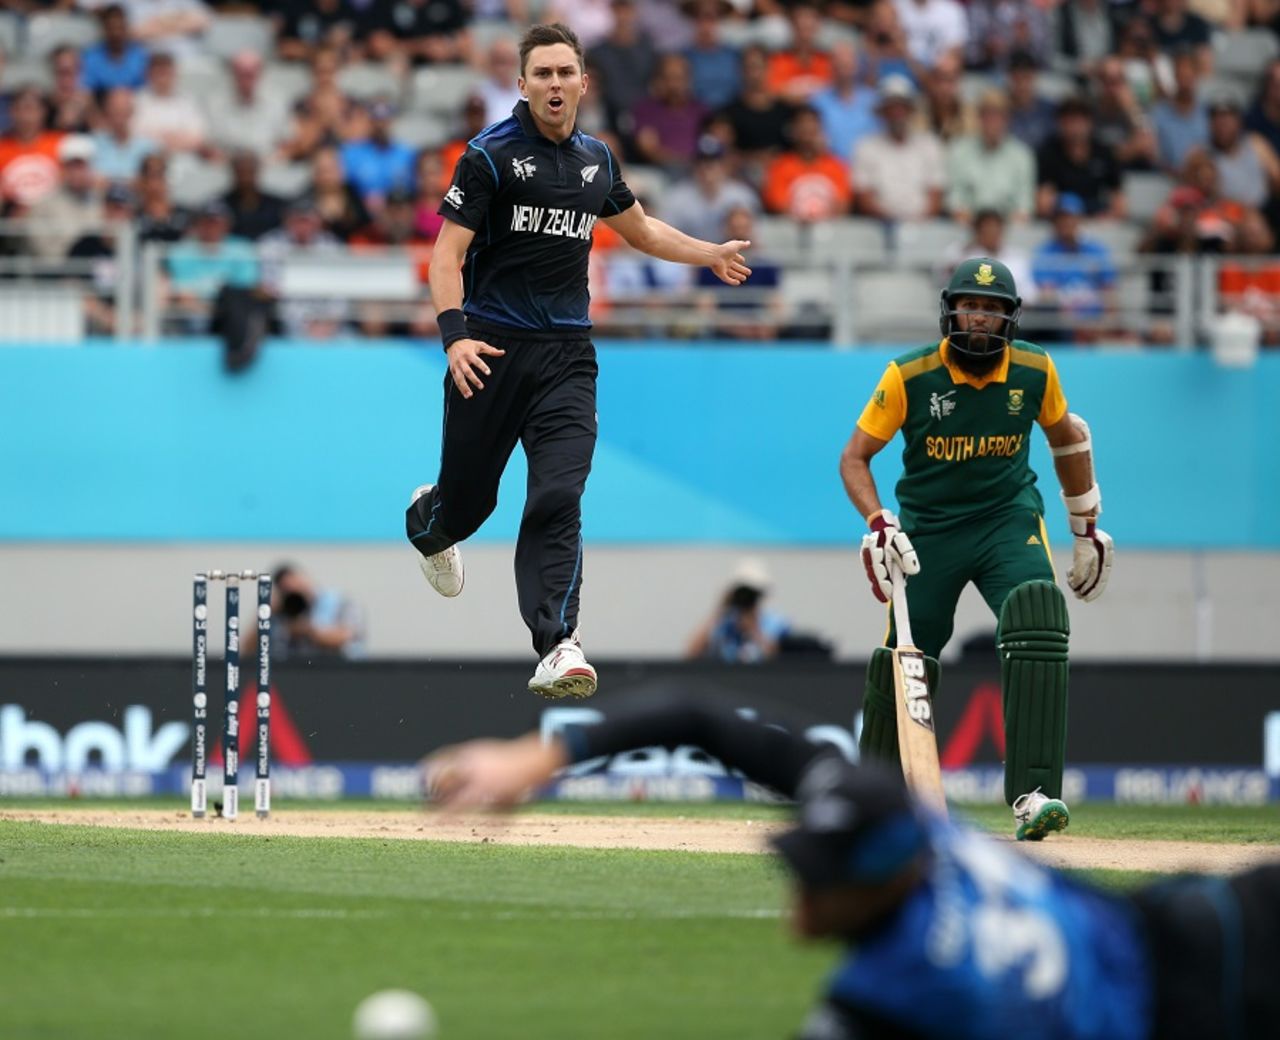 So close: Trent Boult watches an edge fly past the slips, New Zealand v South Africa, World Cup 2015, 1st Semi-Final, Auckland, March 24, 2015